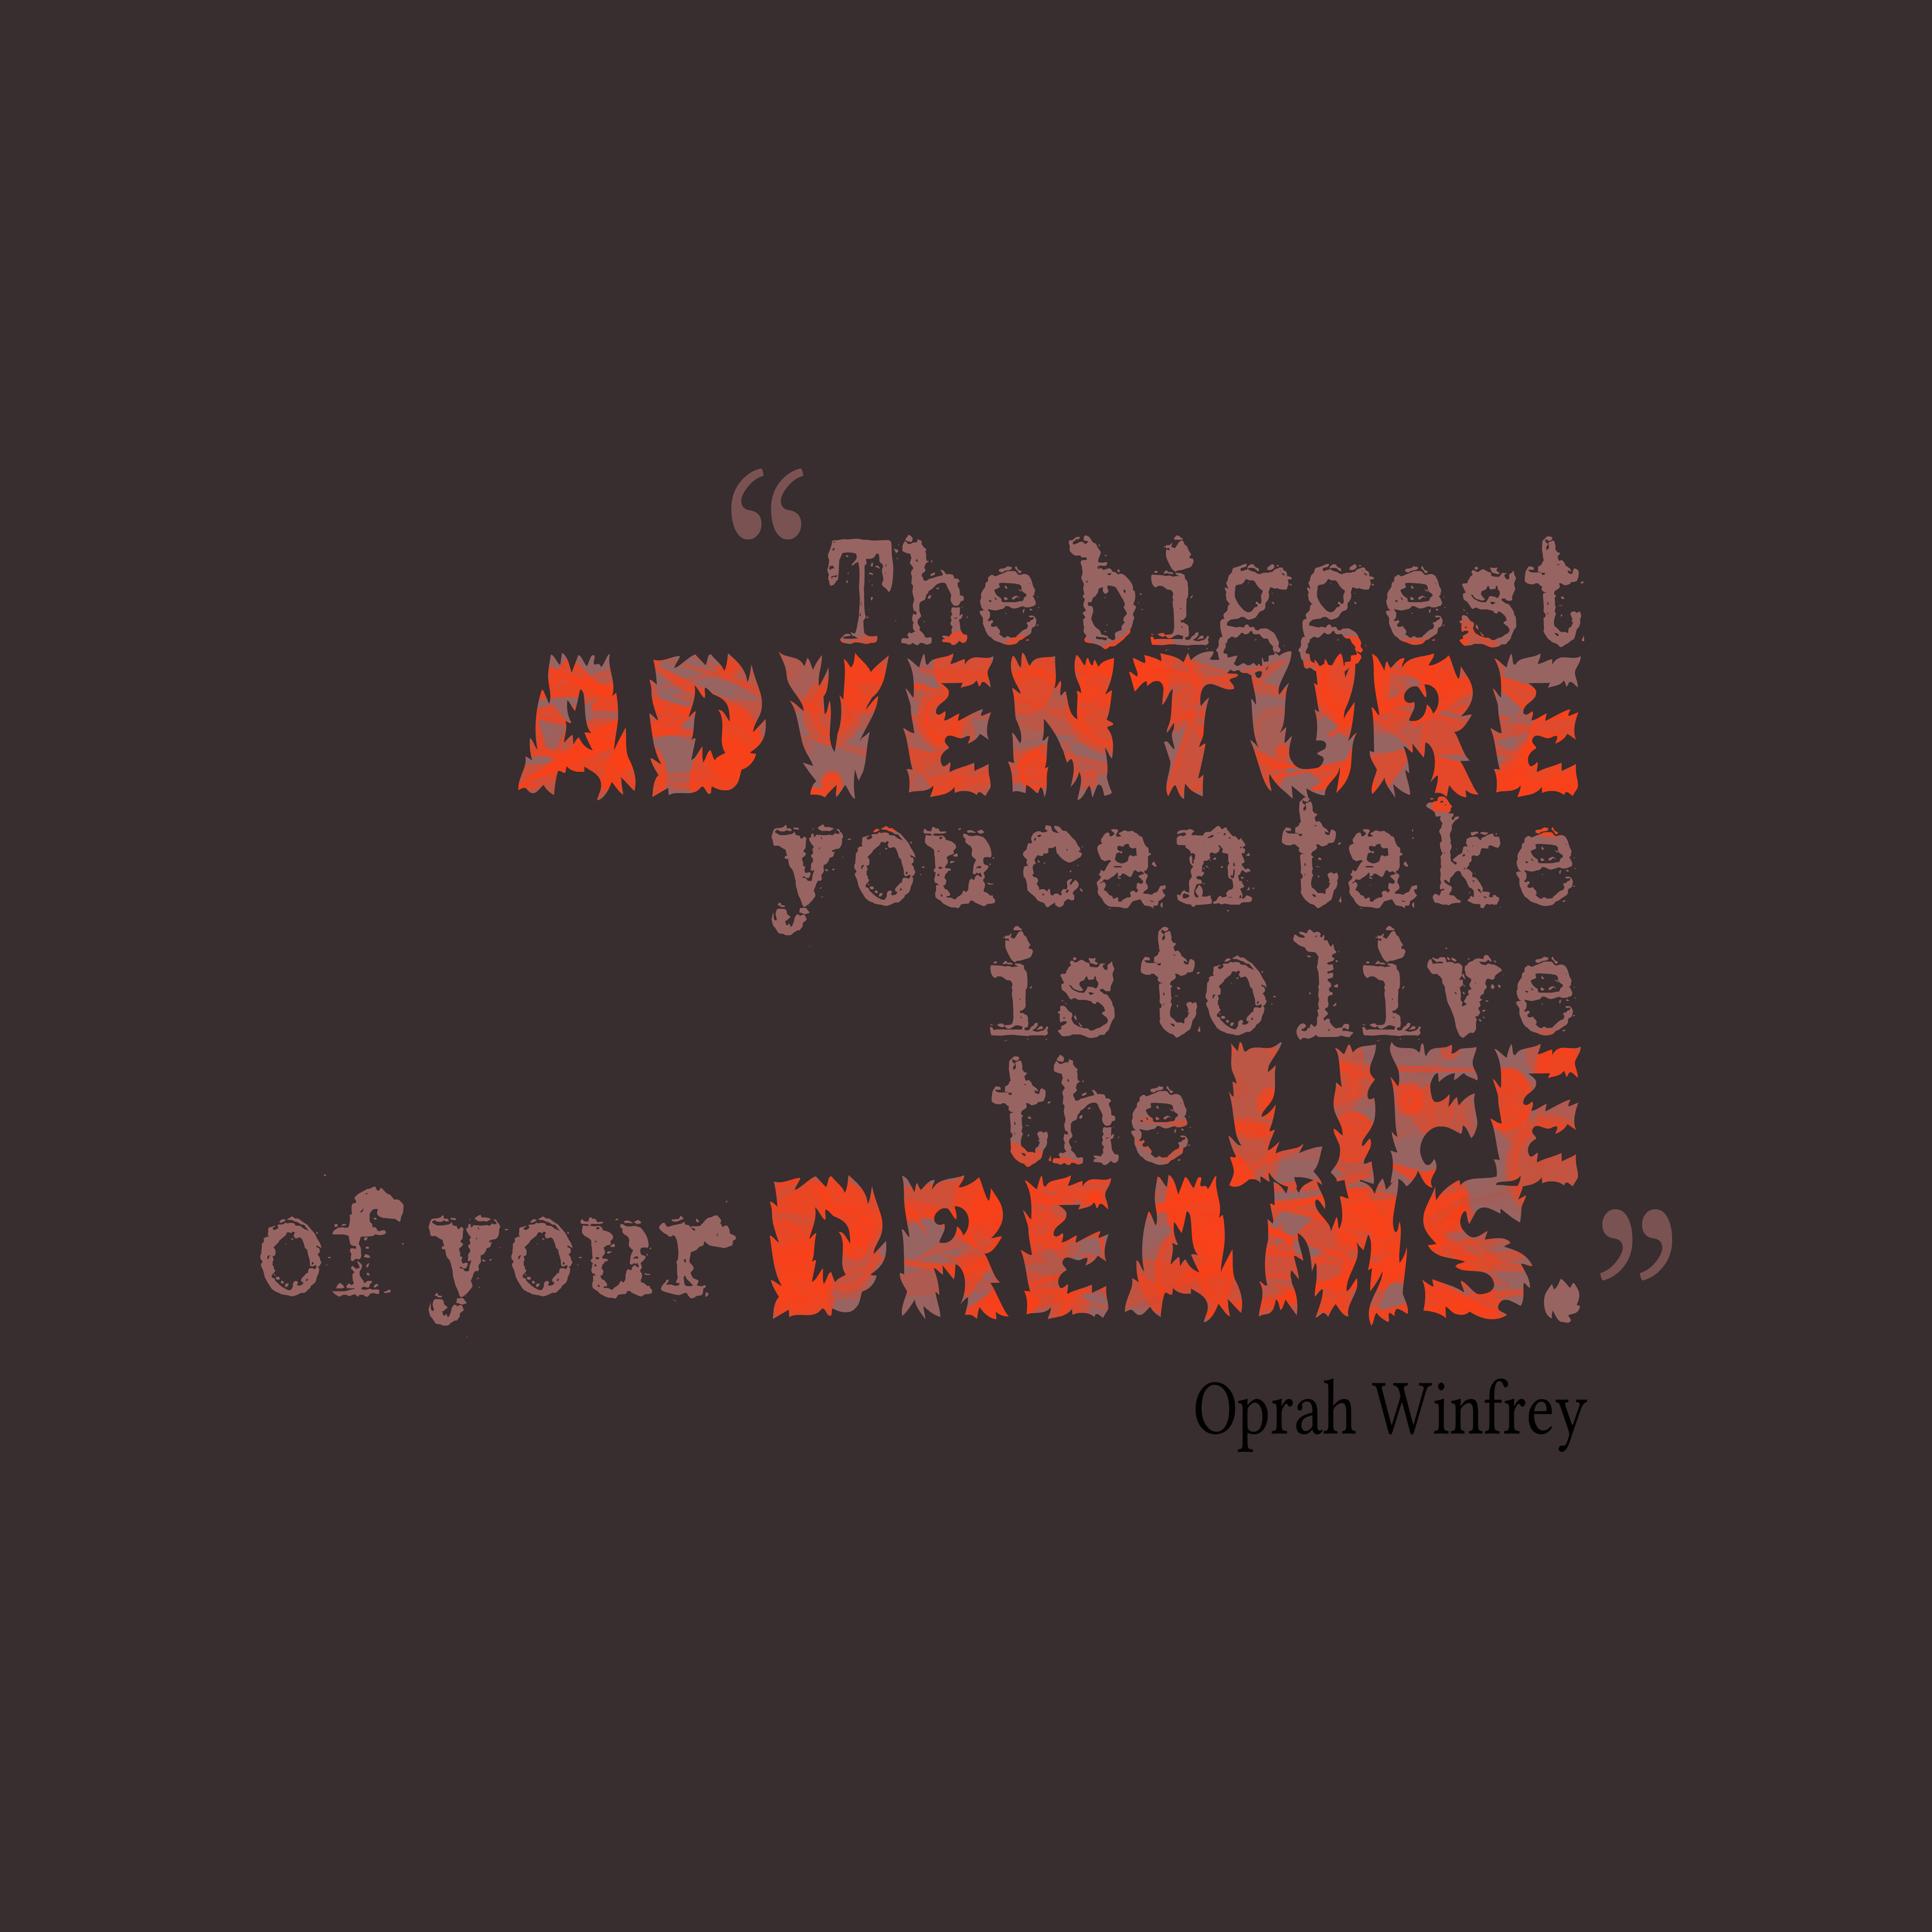 The biggest adventure you can take is to live the life of your dreams - Oprah Winfrey